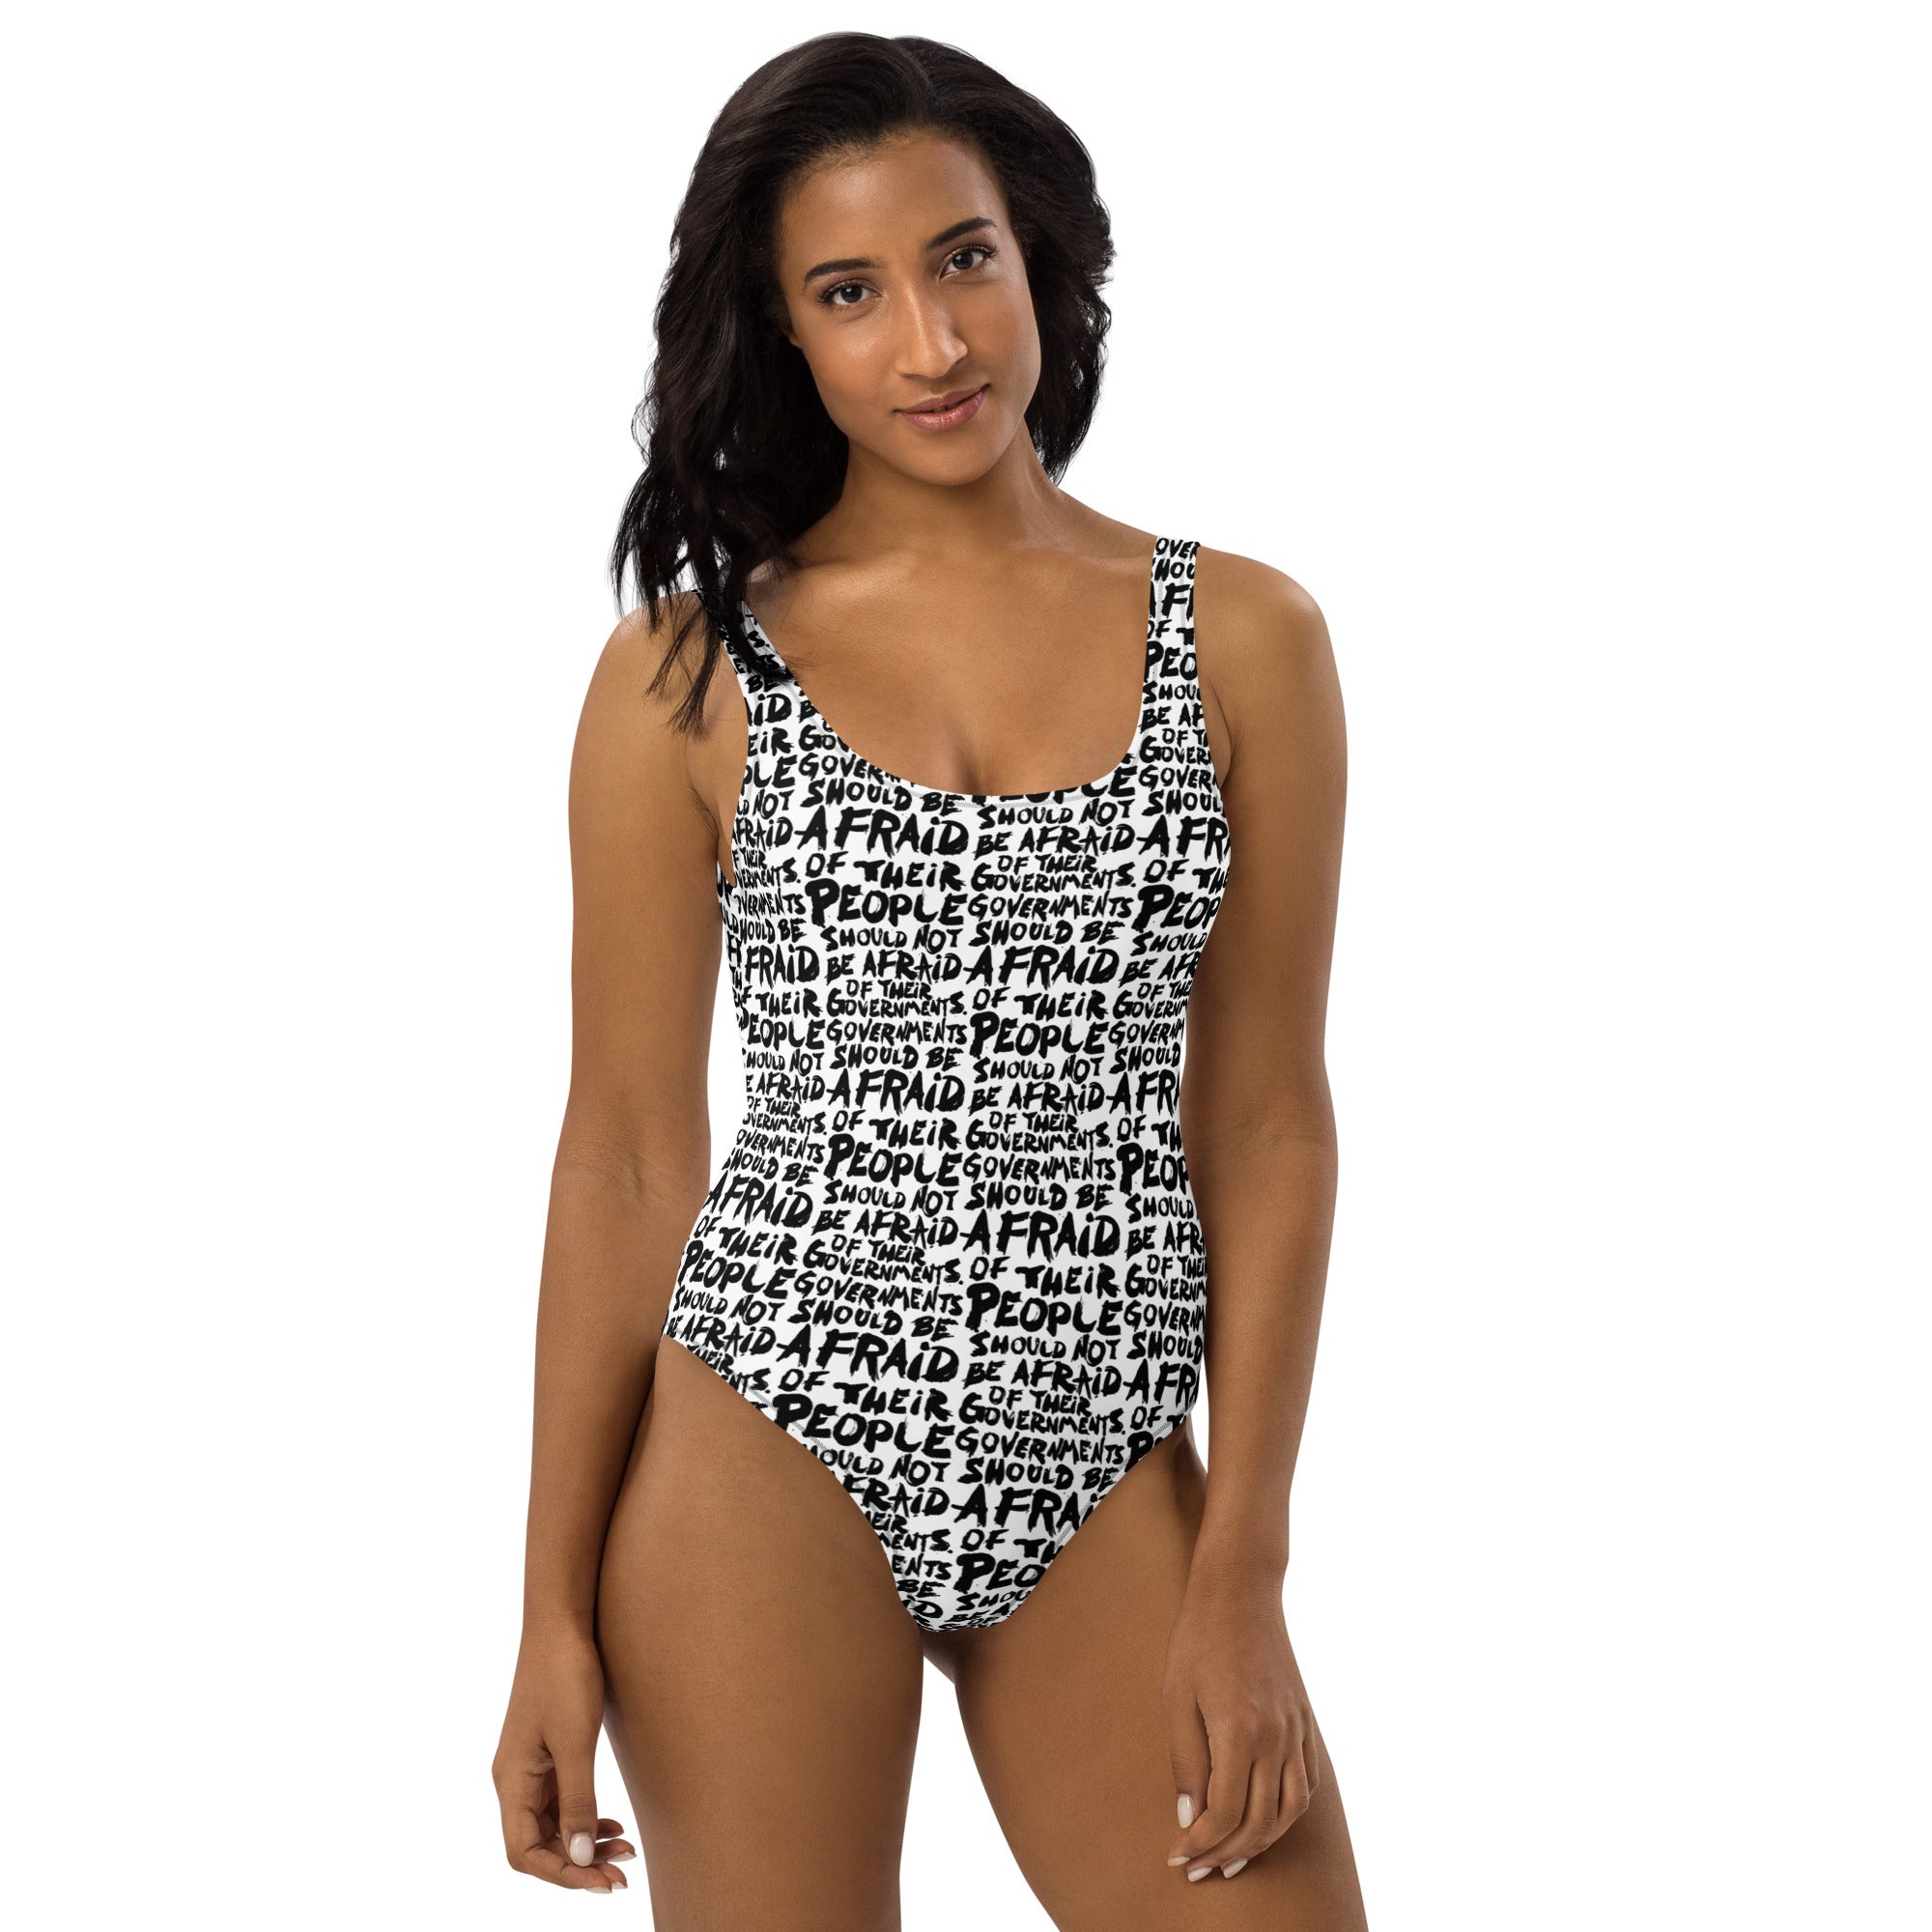 People Should Not Be Afraid of Their Governments One-Piece Swimsuit